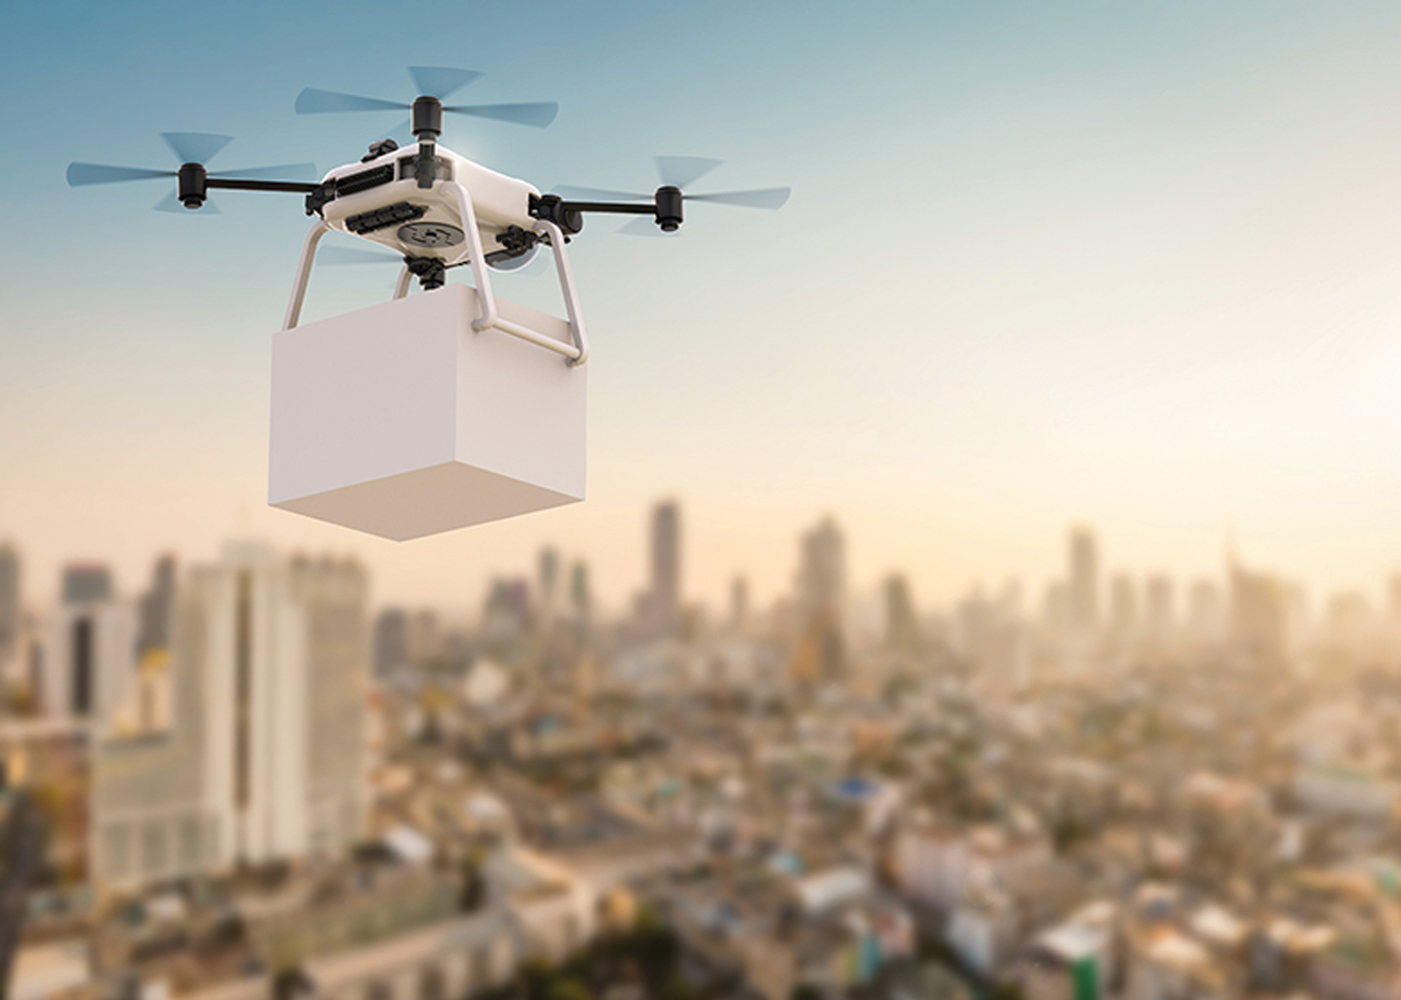 Drone delivering the package thanks to GNSS augmentation services